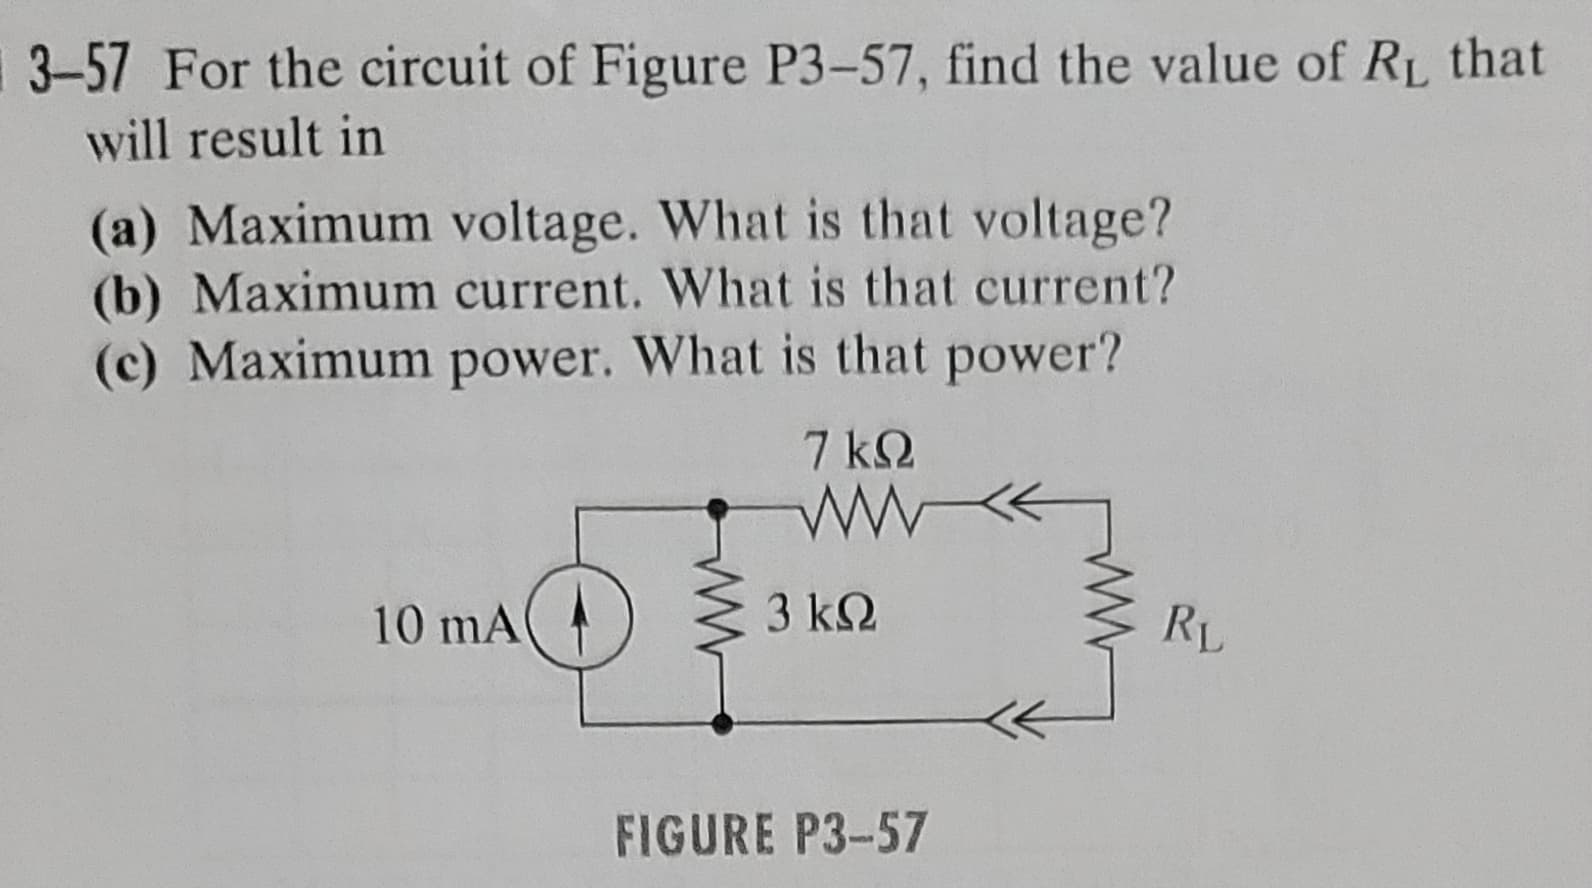 3-57 For the circuit of Figure P3-57, find the value of RL that
will result in
(a) Maximum voltage. What is that voltage?
(b) Maximum current. What is that current?
(c) Maximum power. What is that power?
10 mA
7kQ
ww
3 ΚΩ
FIGURE P3-57
RL